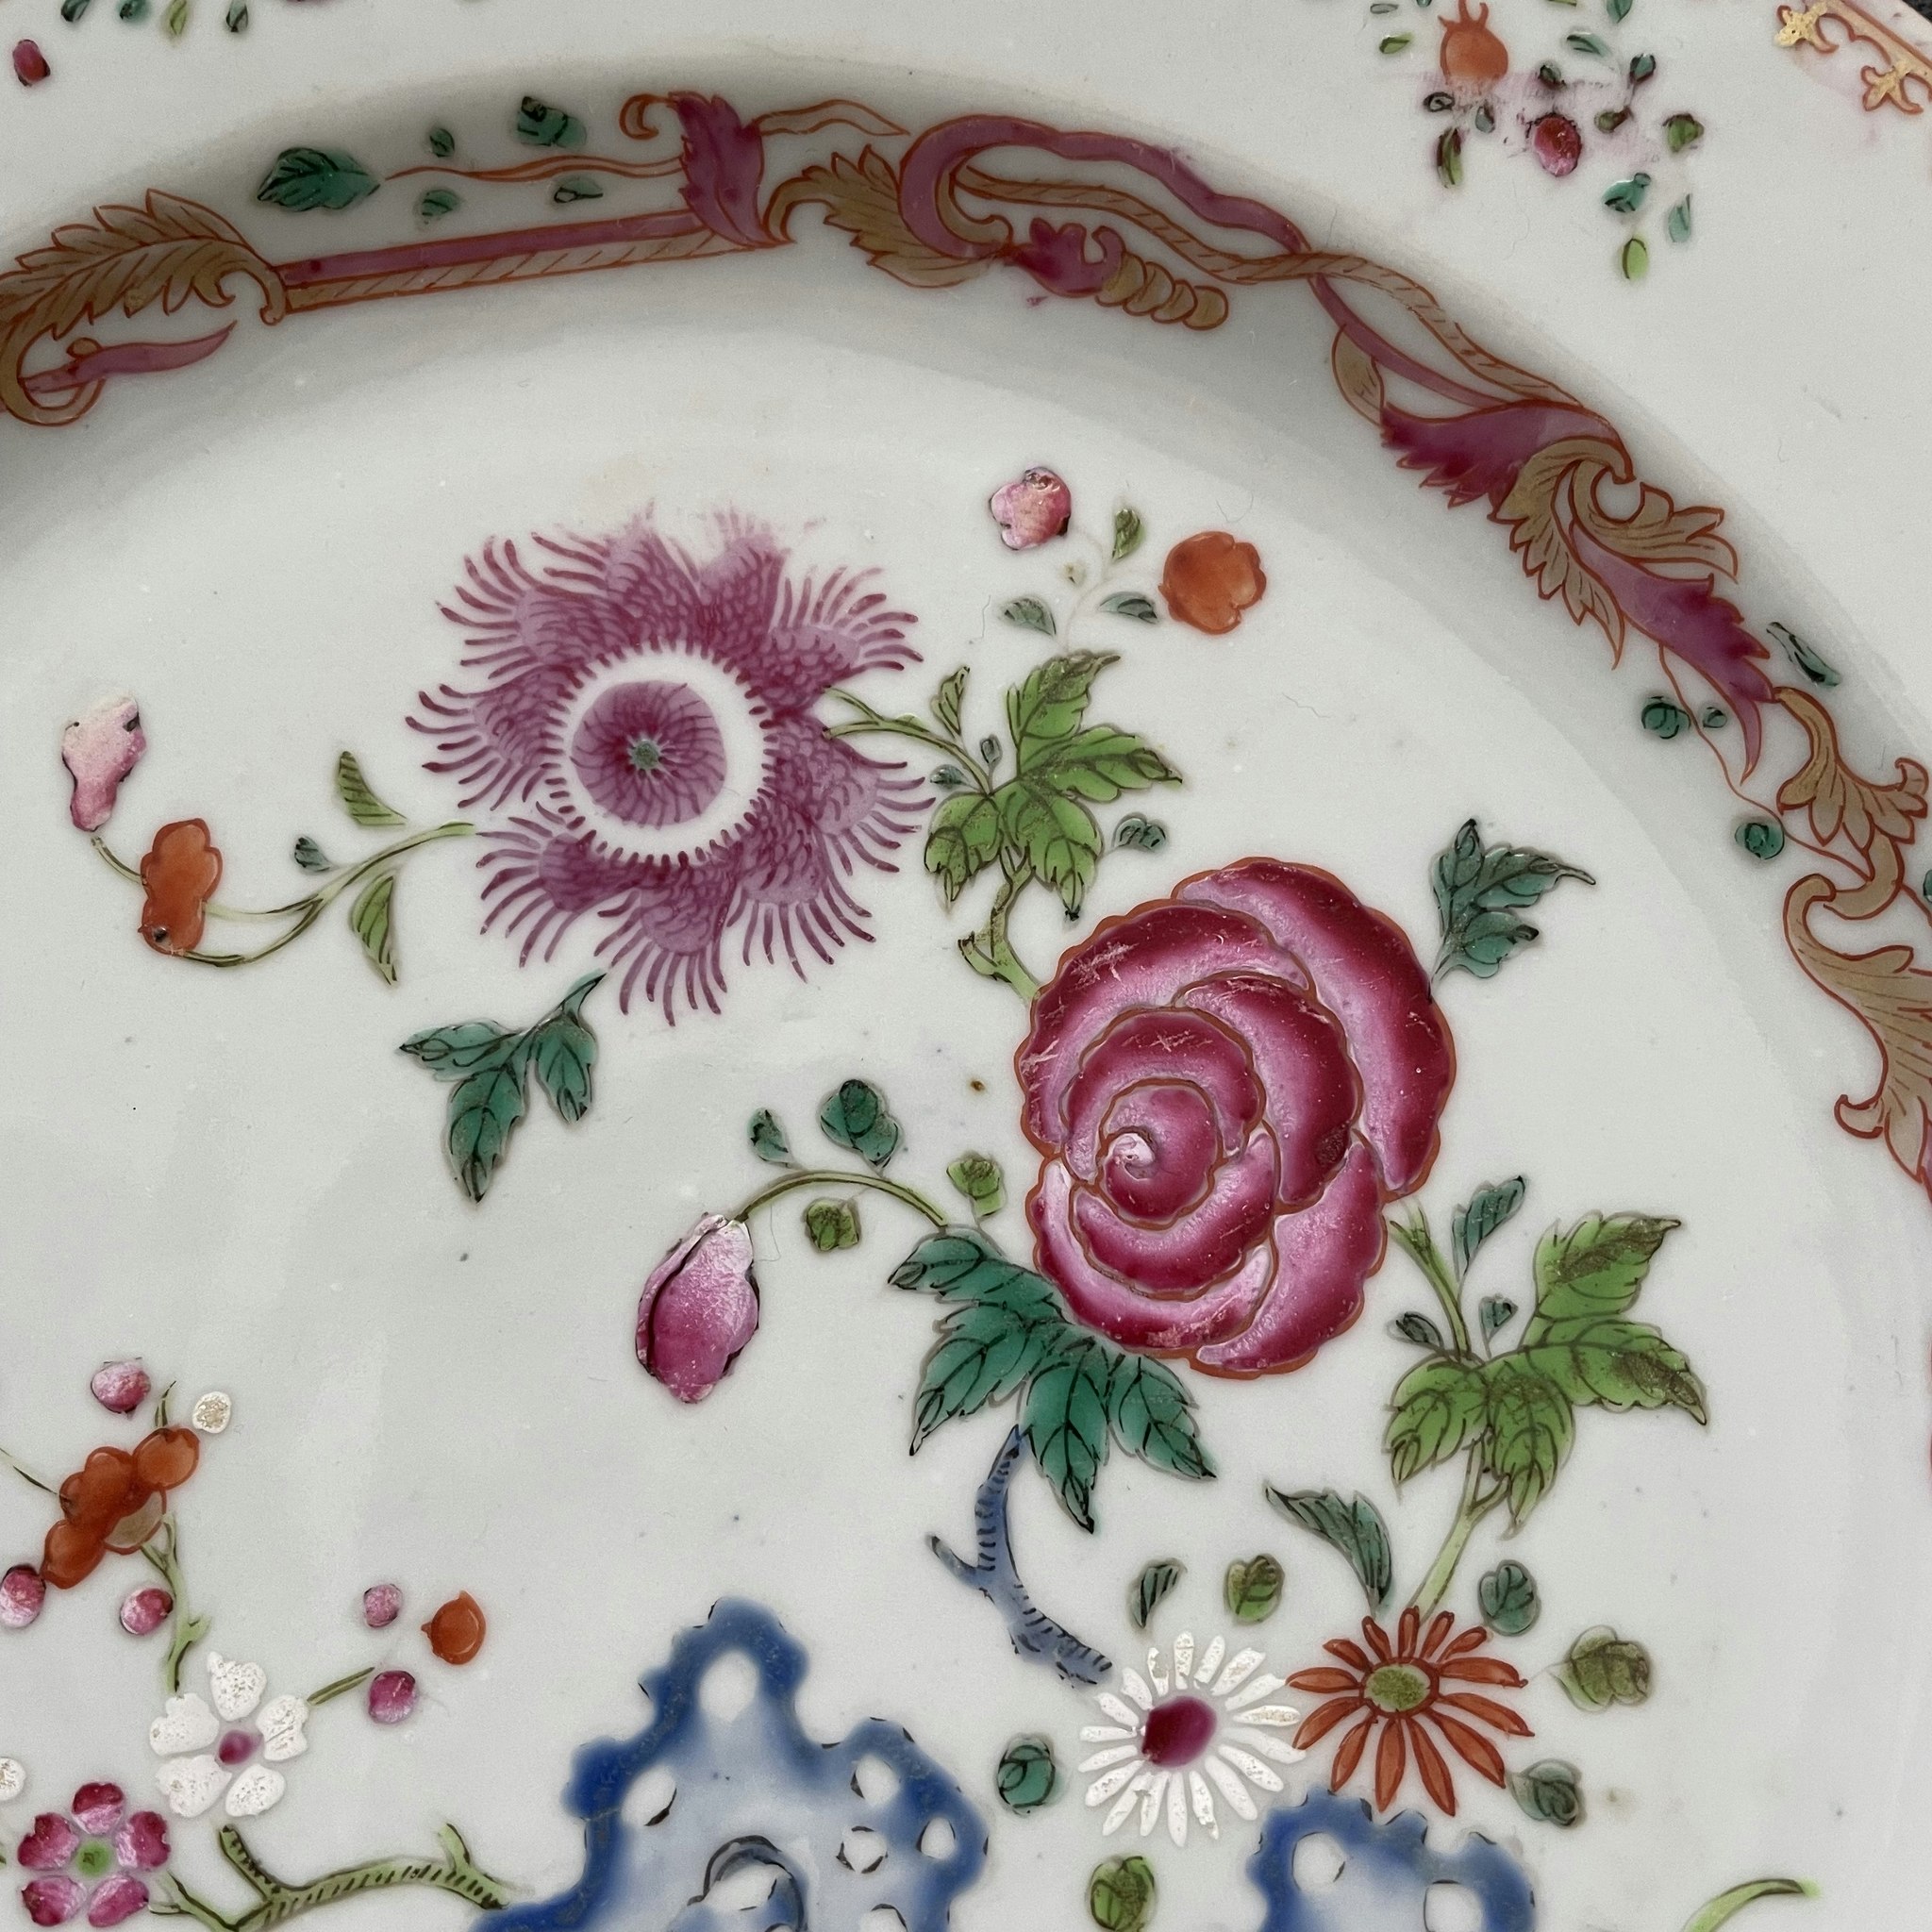 Chinese Antique famille rose porcelain Plate, Qianlong Period #1776